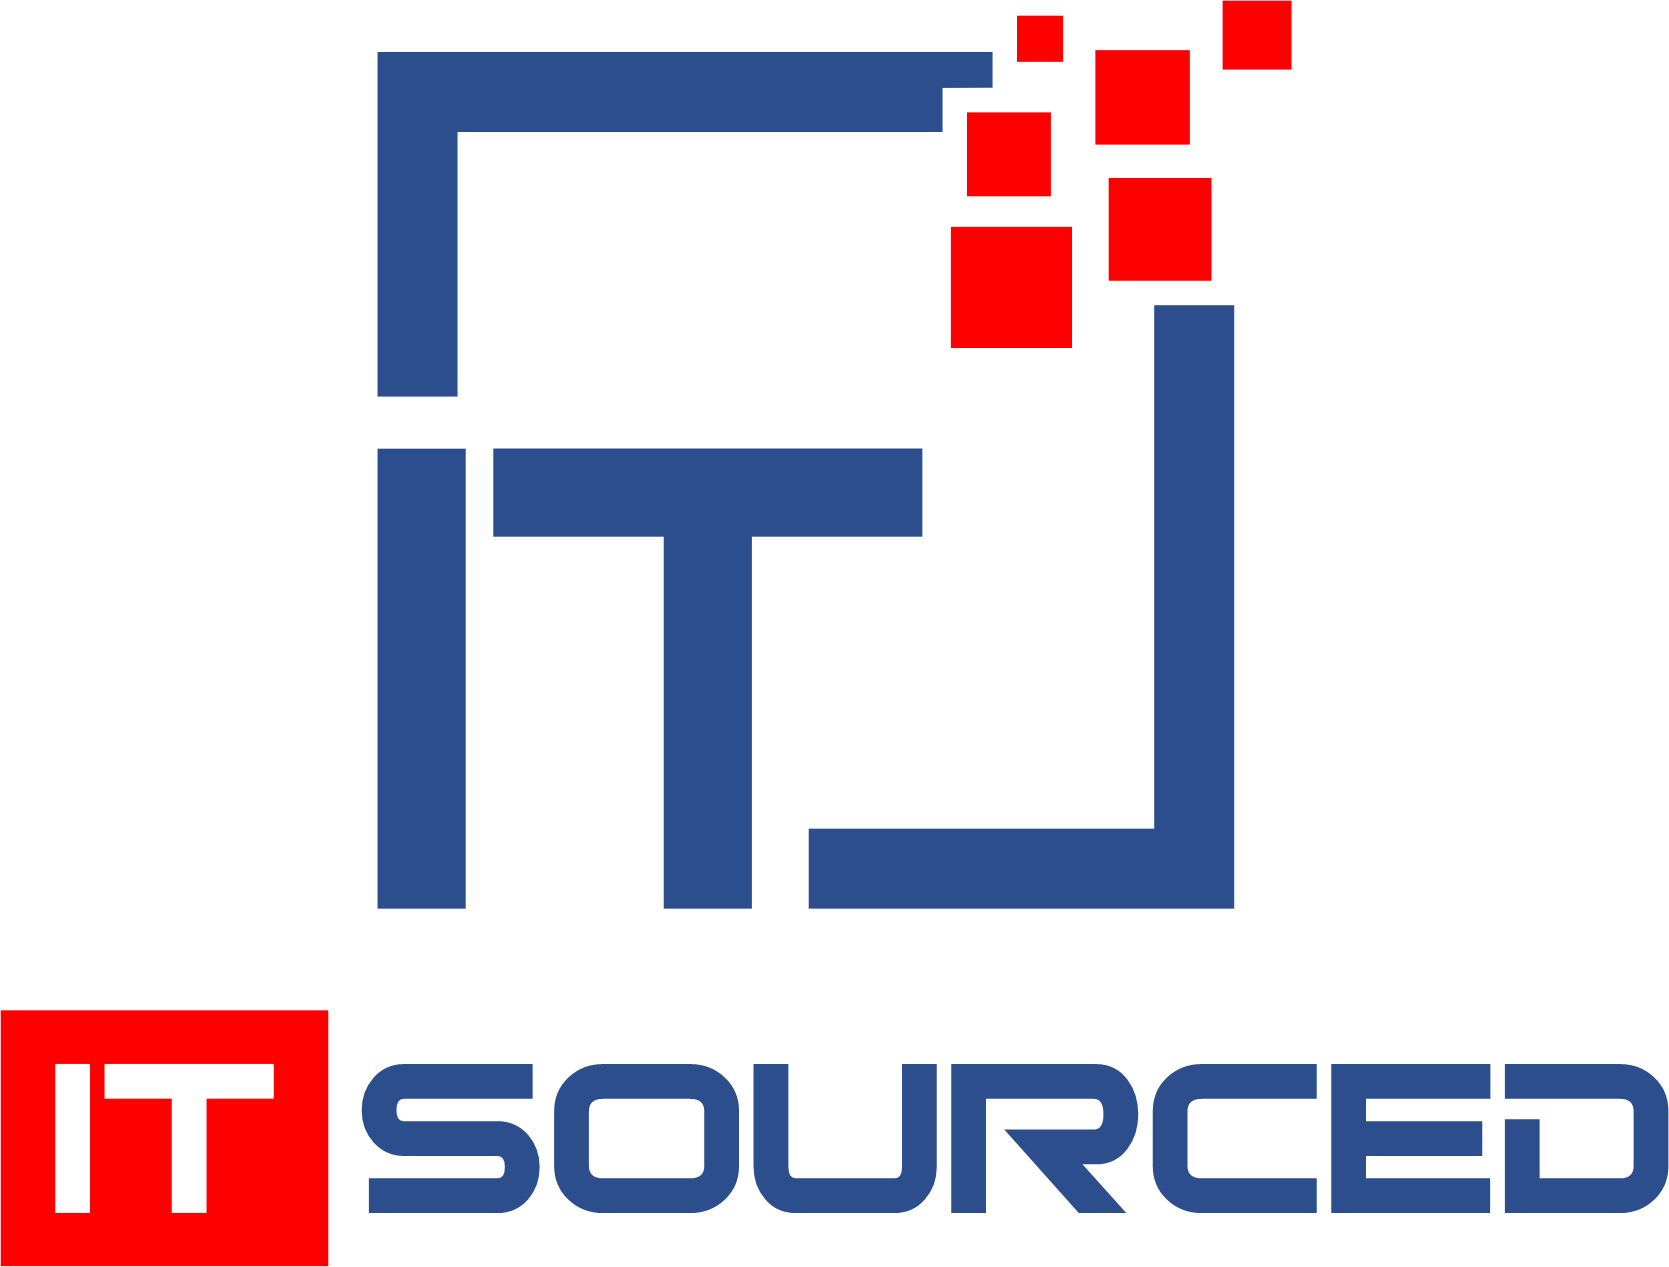 ITsourced